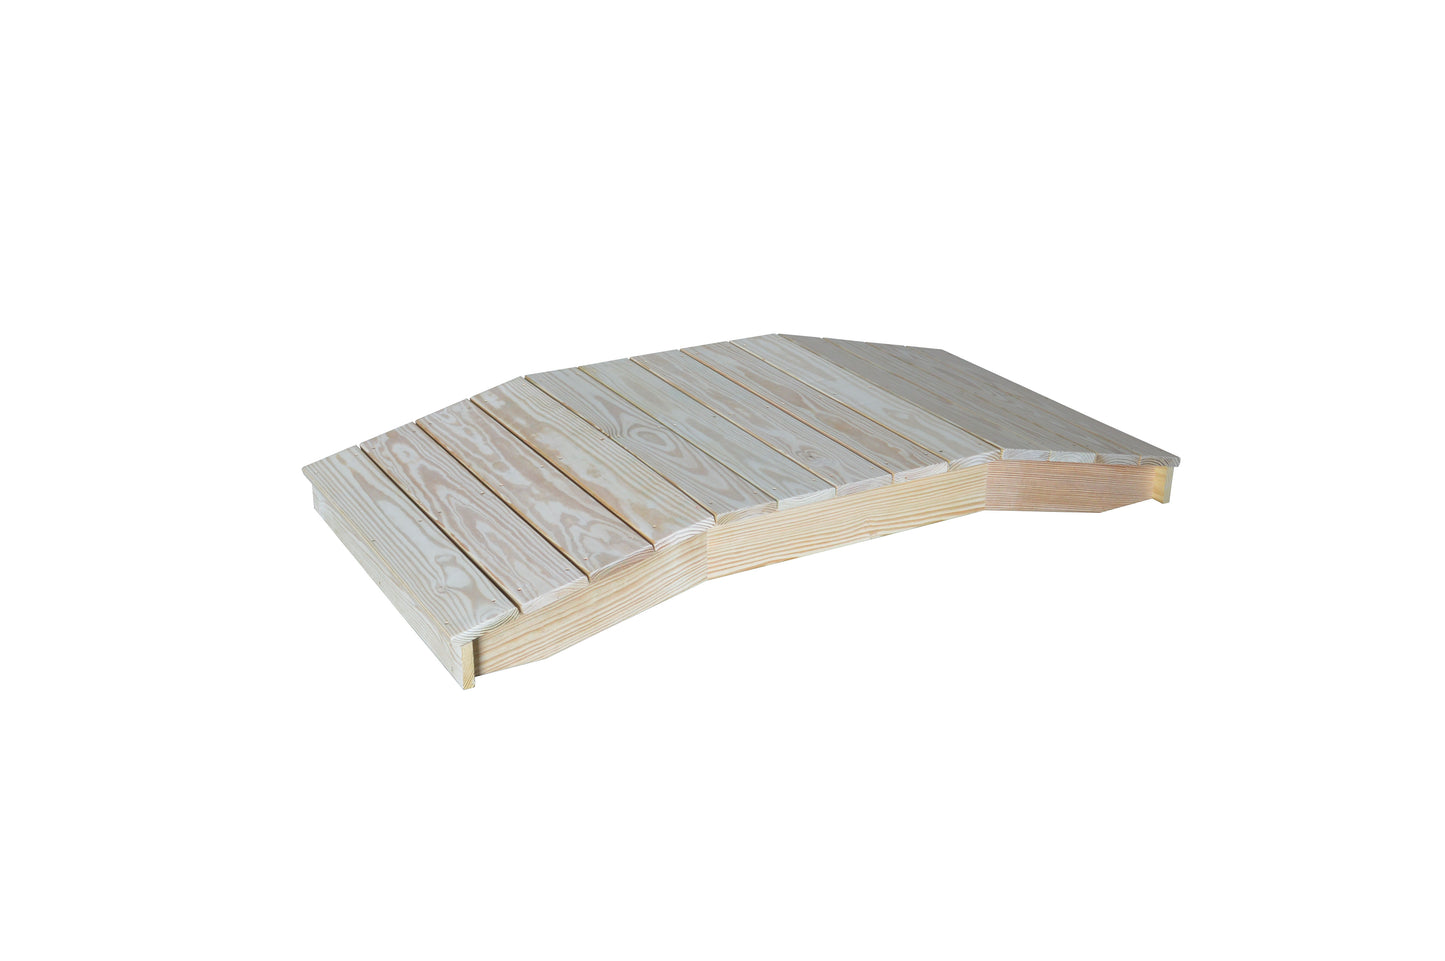 A&L Furniture Pressure Treated Pine 3'  x  6' Standard Plank Bridge - LEAD TIME TO SHIP 10 BUSINESS DAYS